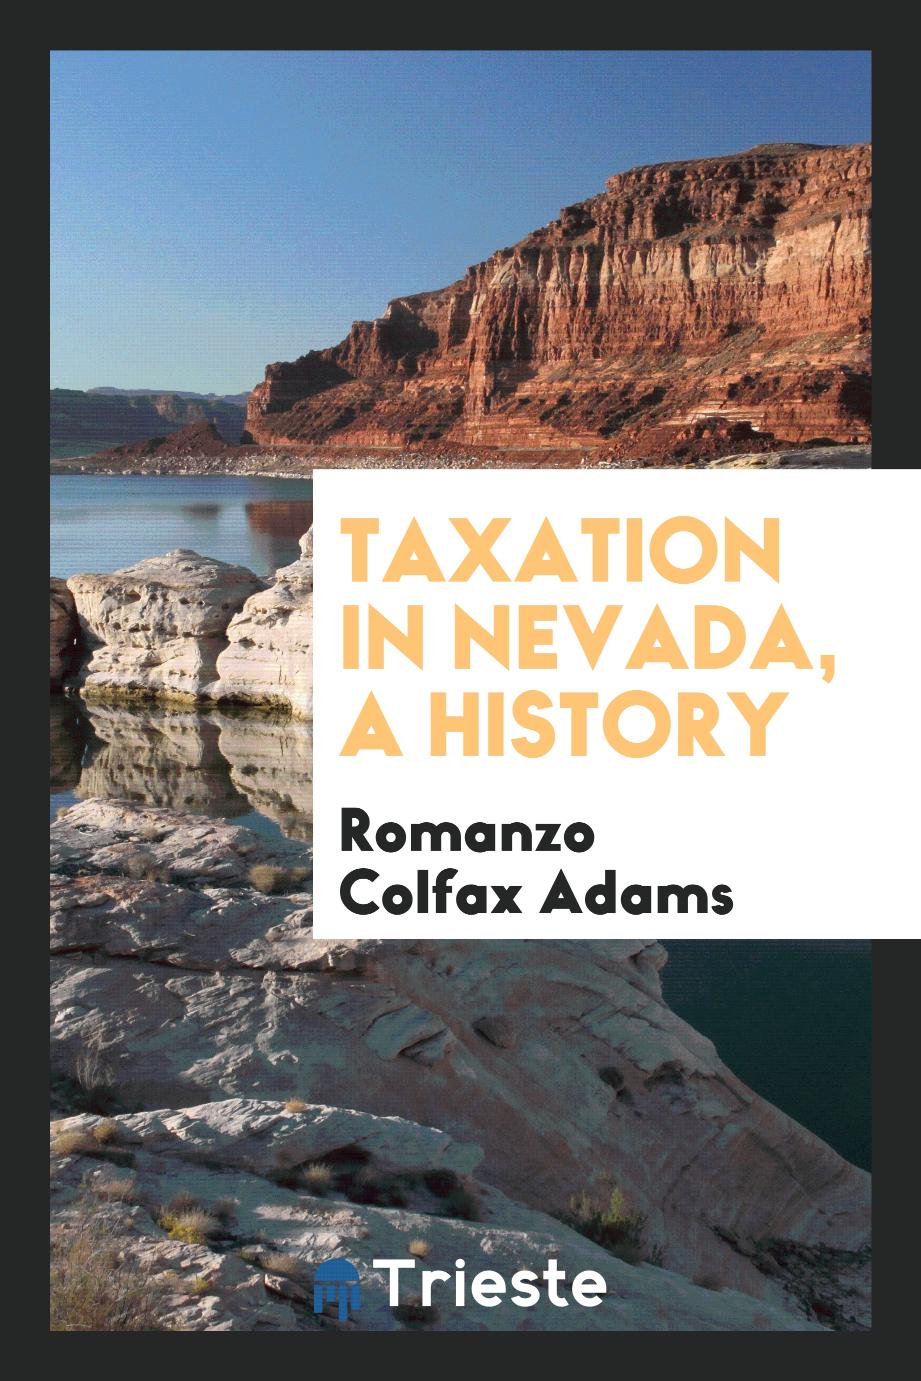 Taxation in Nevada, a history